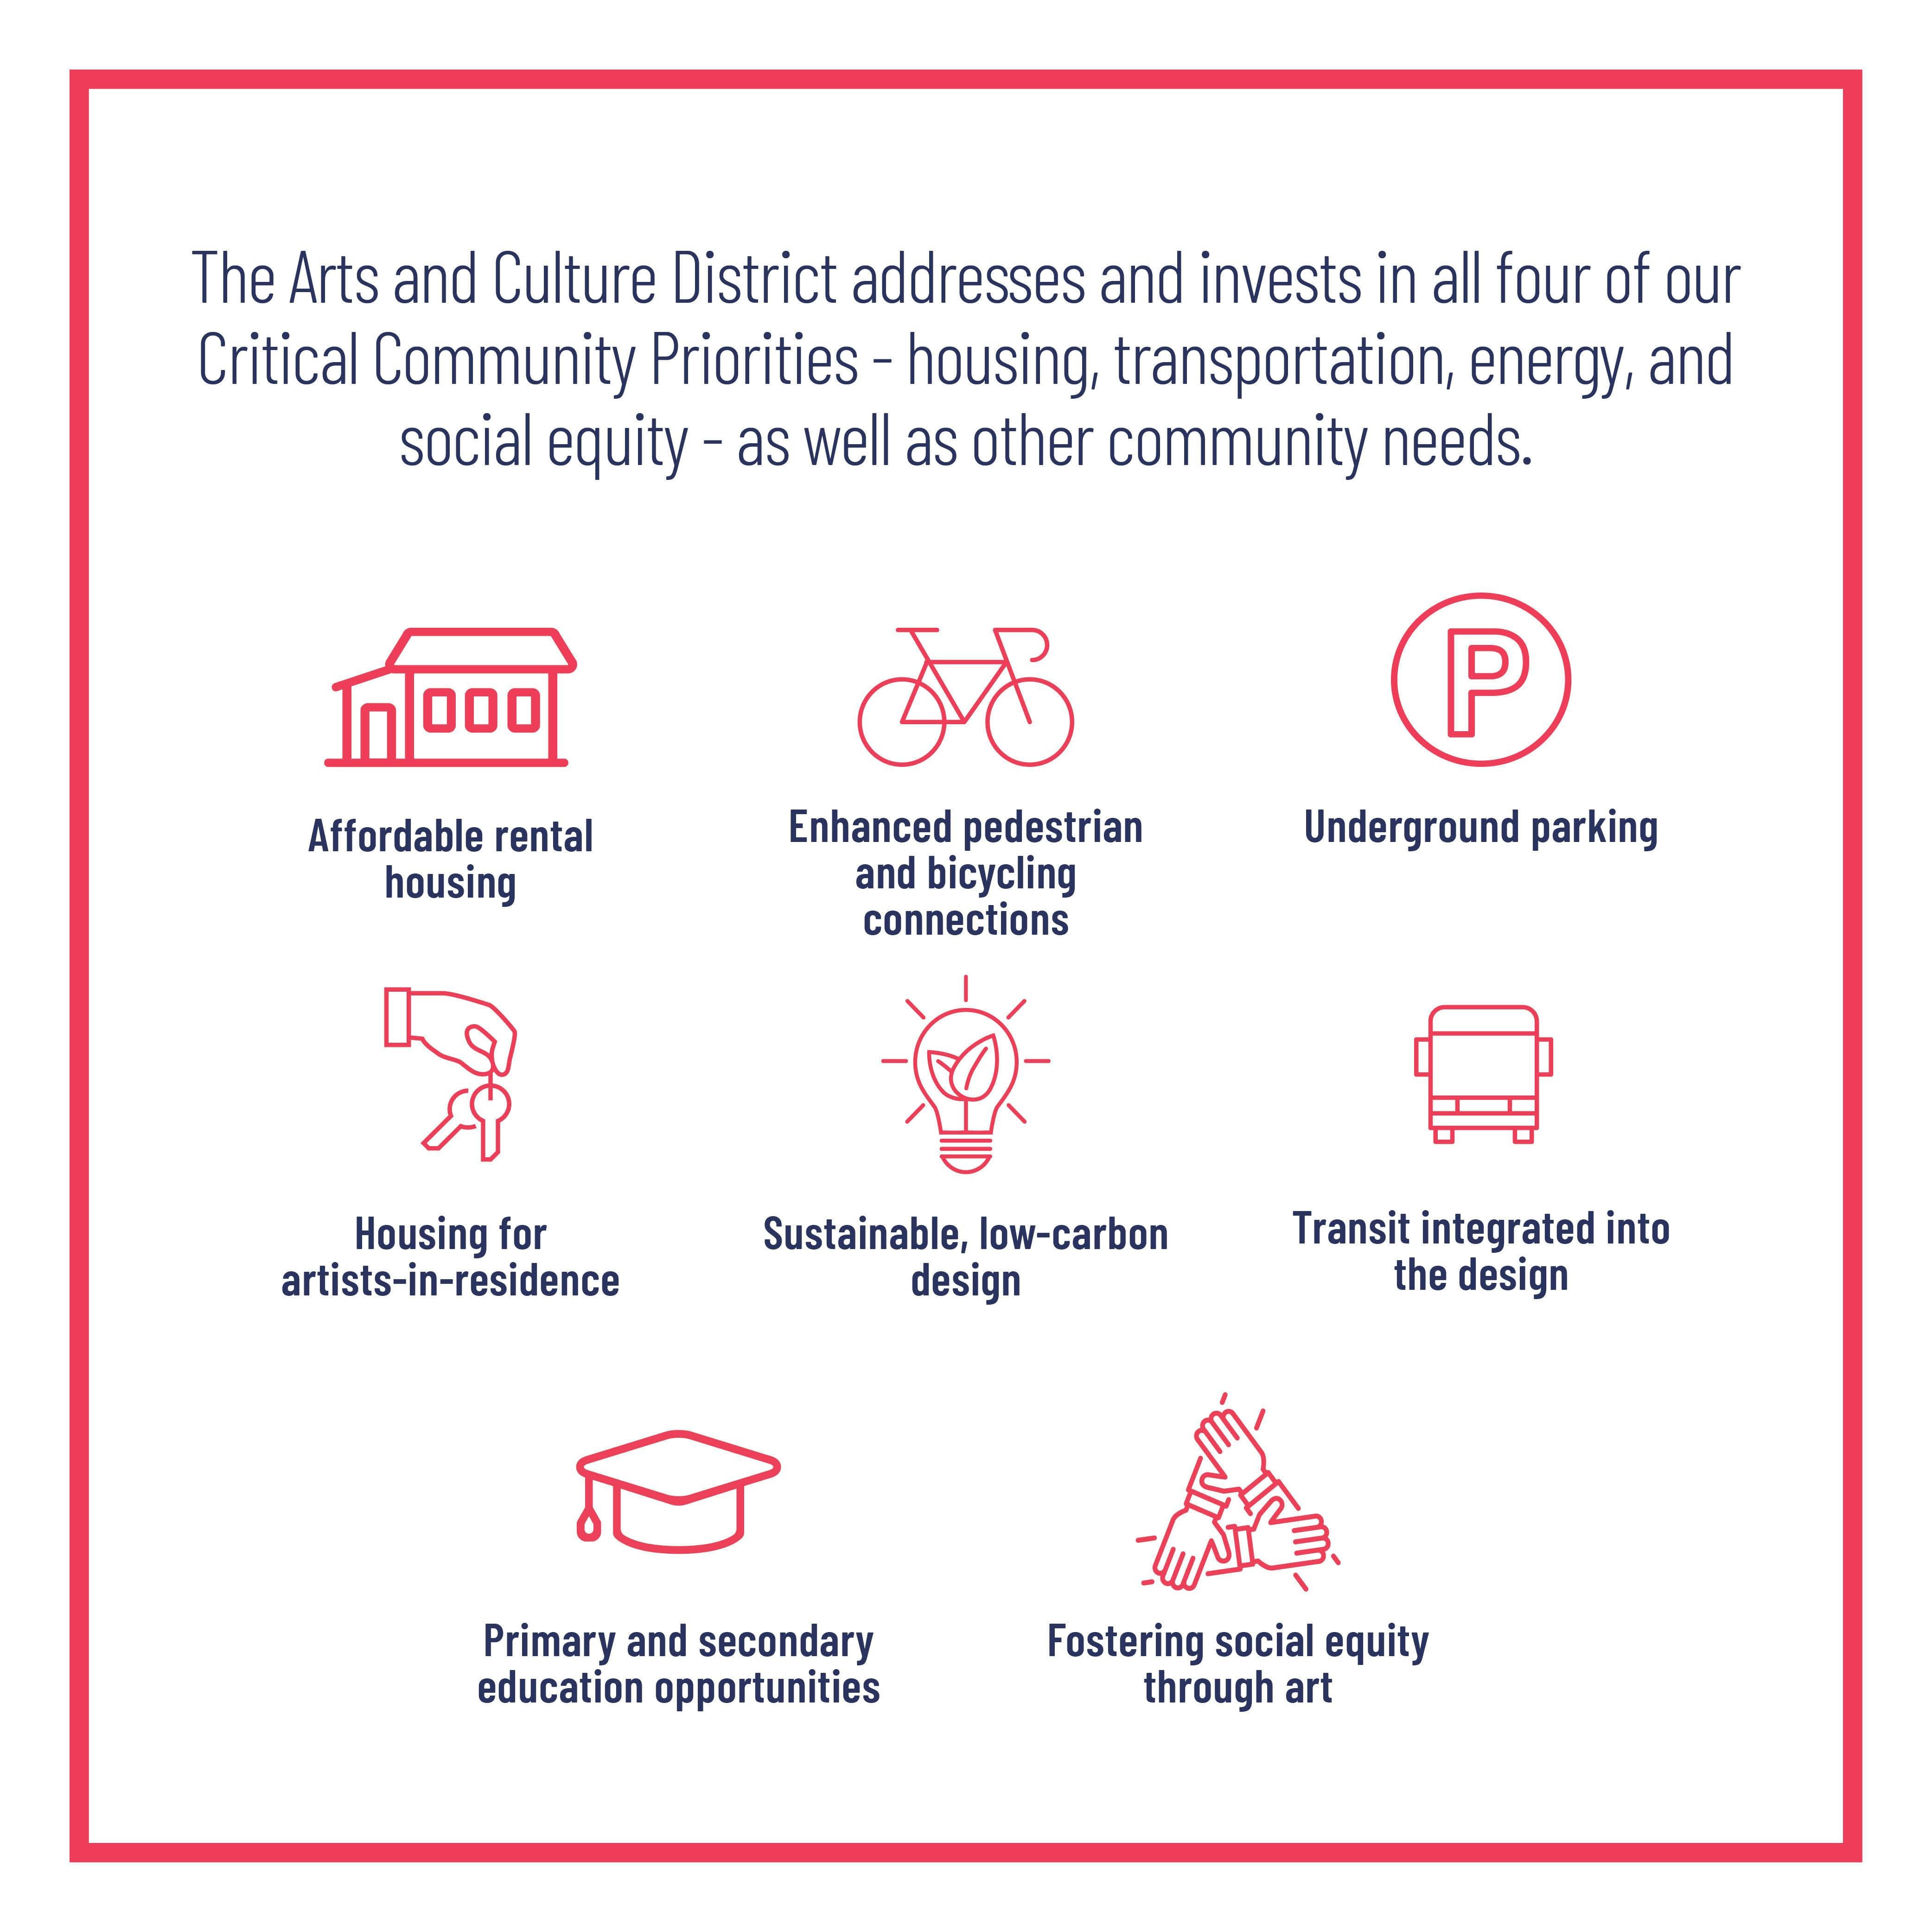 An investment in the Critical Community Priorities